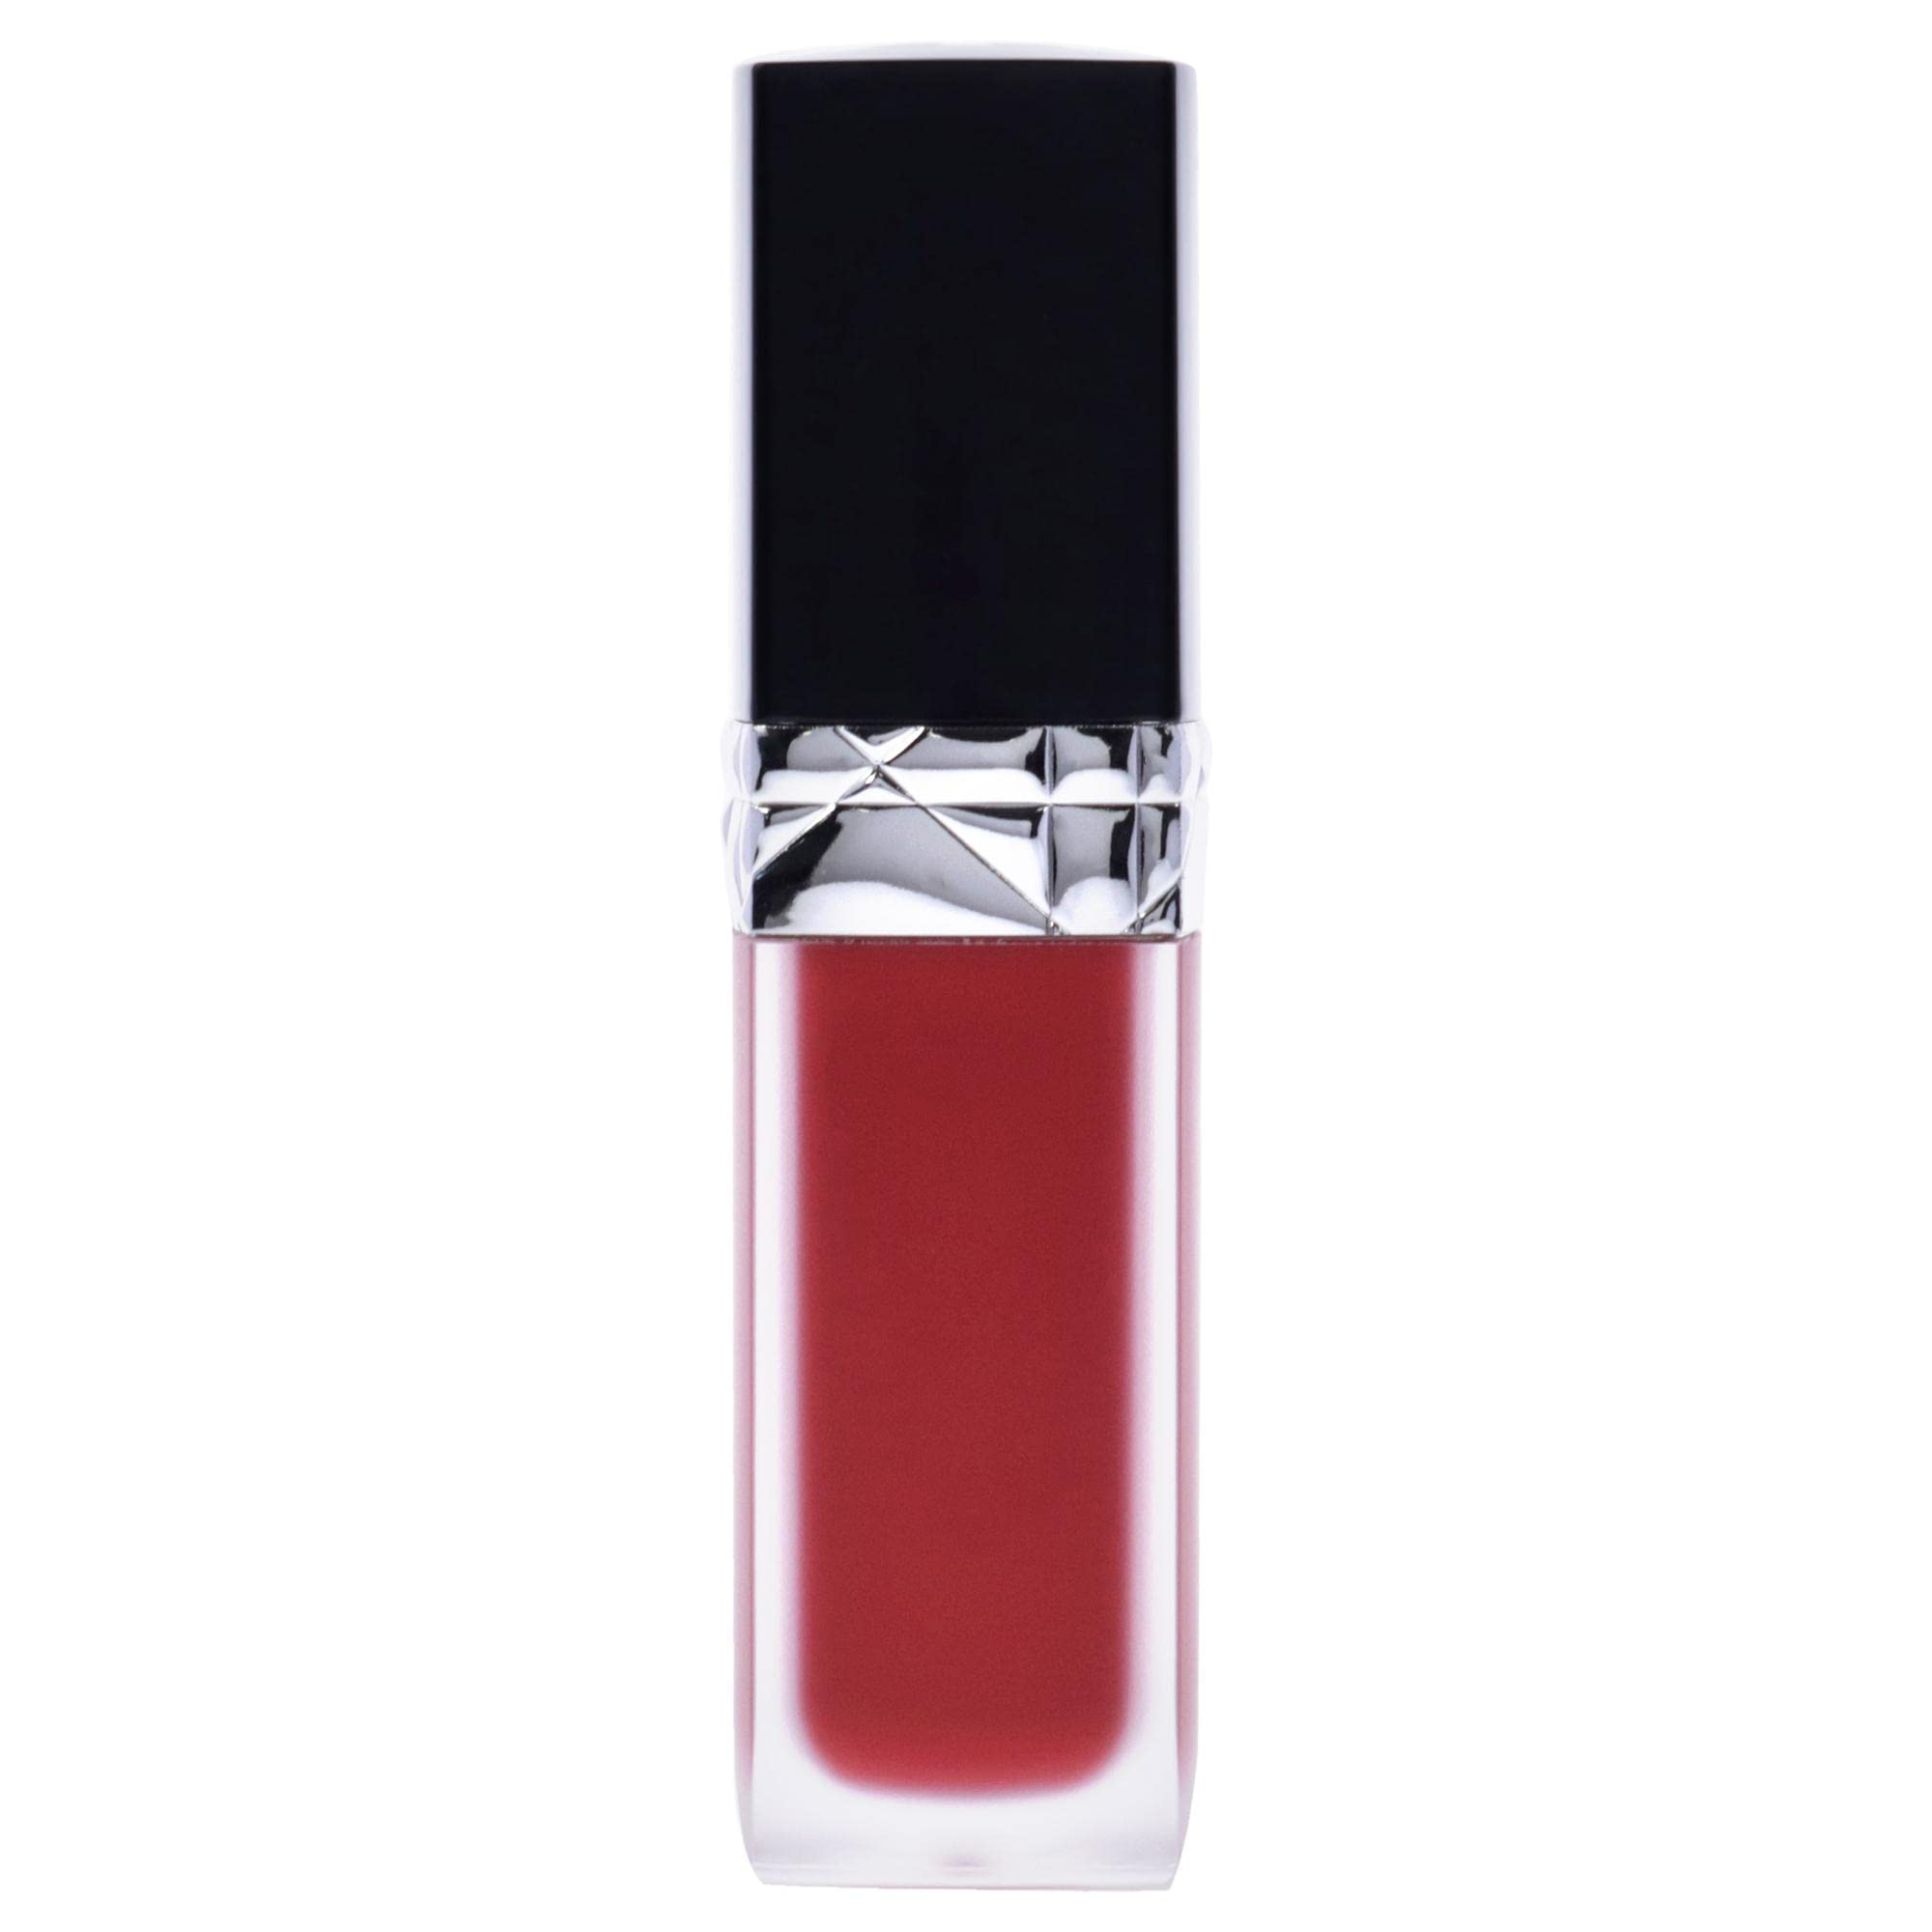 NEW ROUGE DIOR FOREVER LIQUID LIPSTICK 100200760  Transfer proof  formula Chanel Nails polish  YouTube